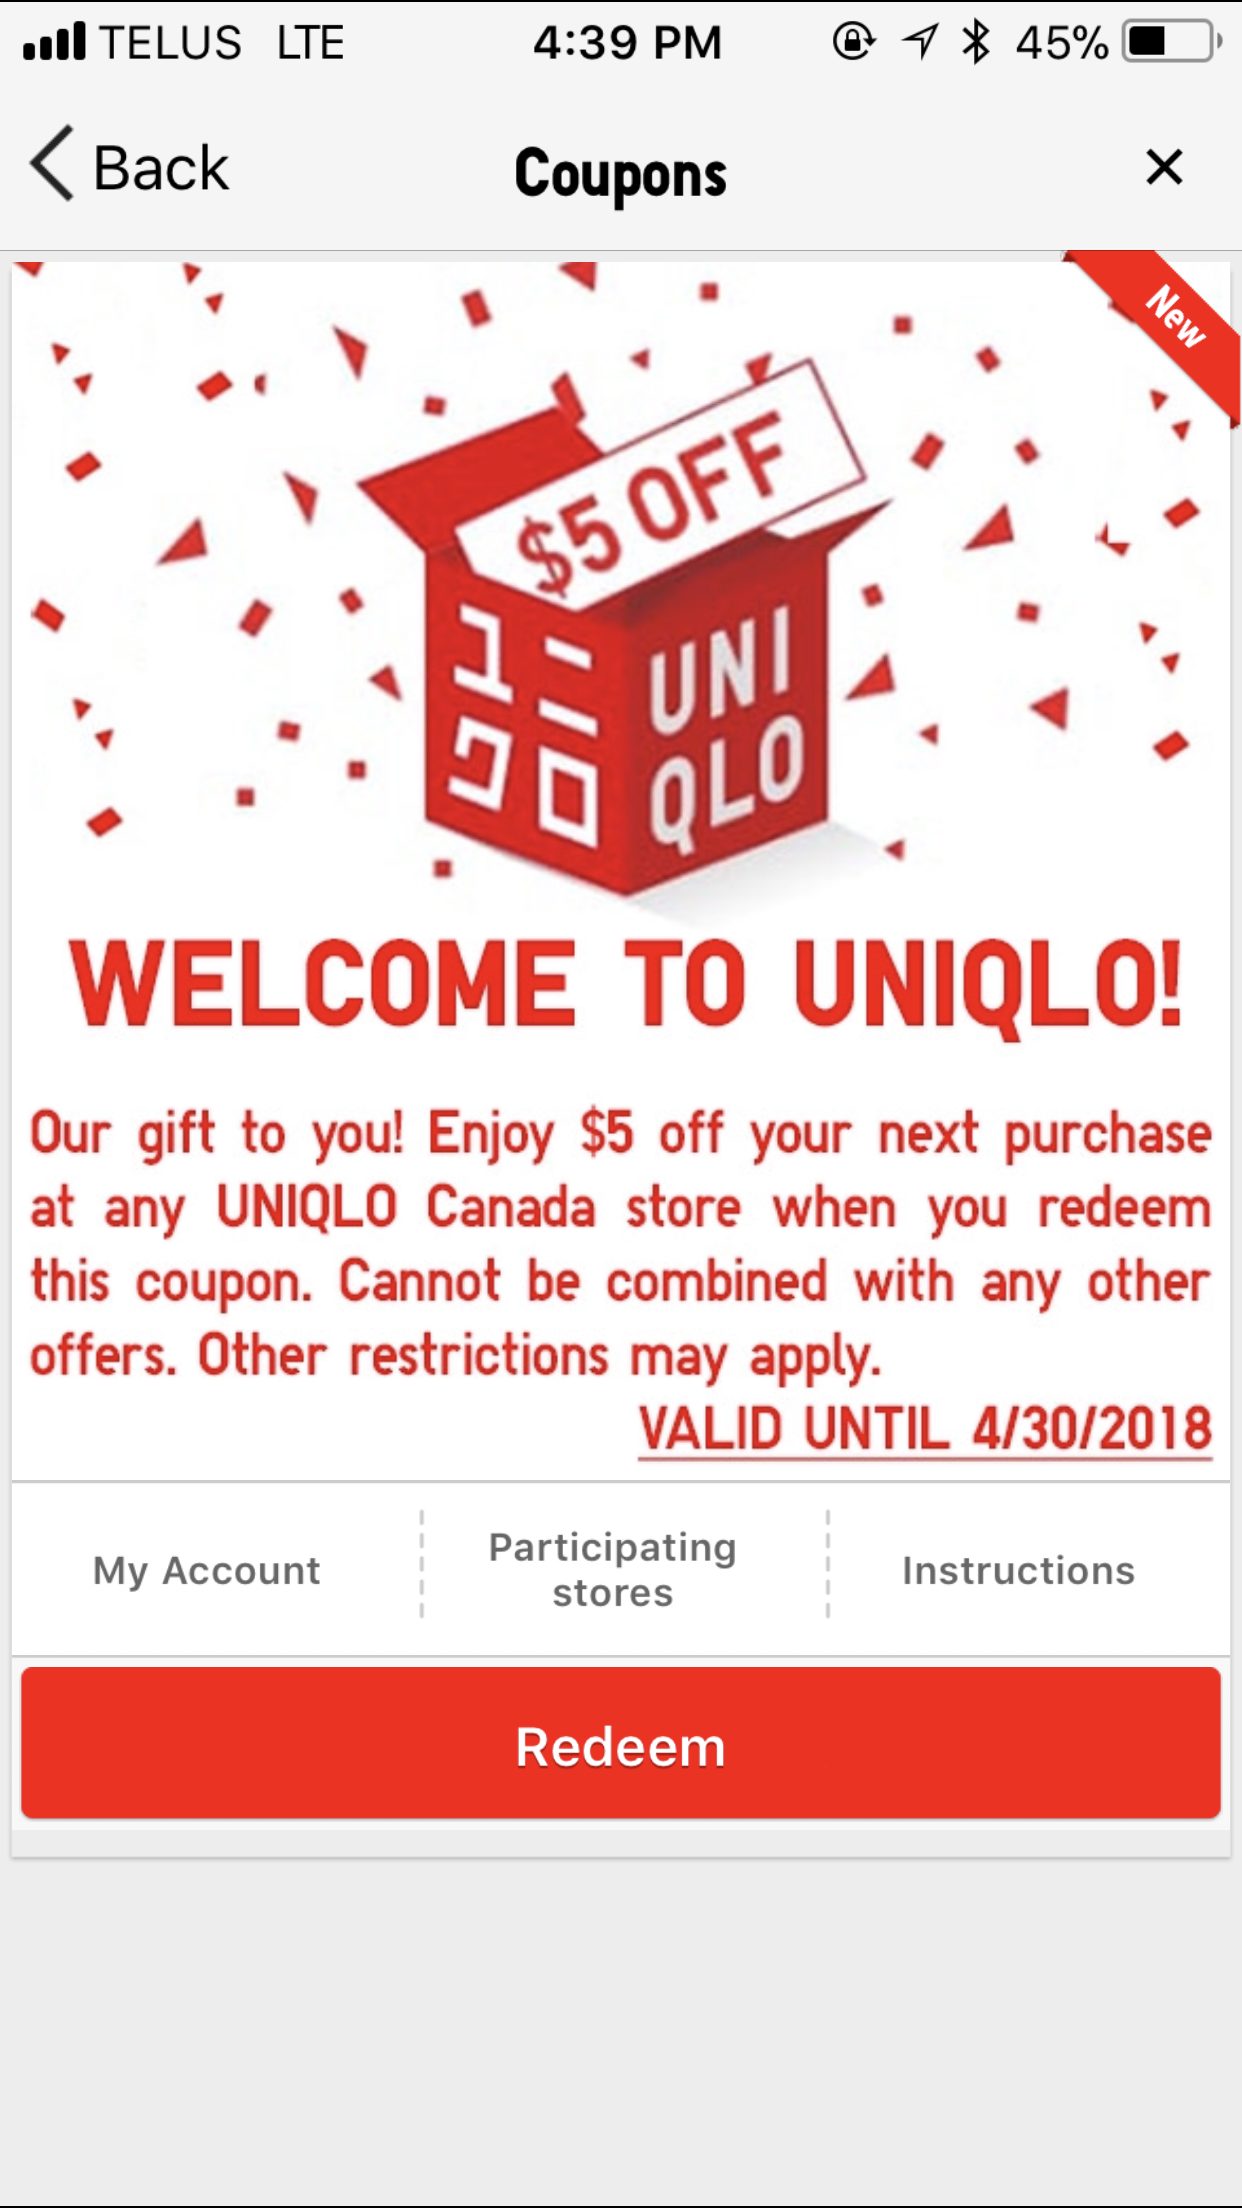 Uniqlo Singapore  UNIQLO Online Store offers you a special discount coupon  to usher in the Chinese New Year Head on to wwwuniqlocomsg now to enjoy  5 discount from now until 23